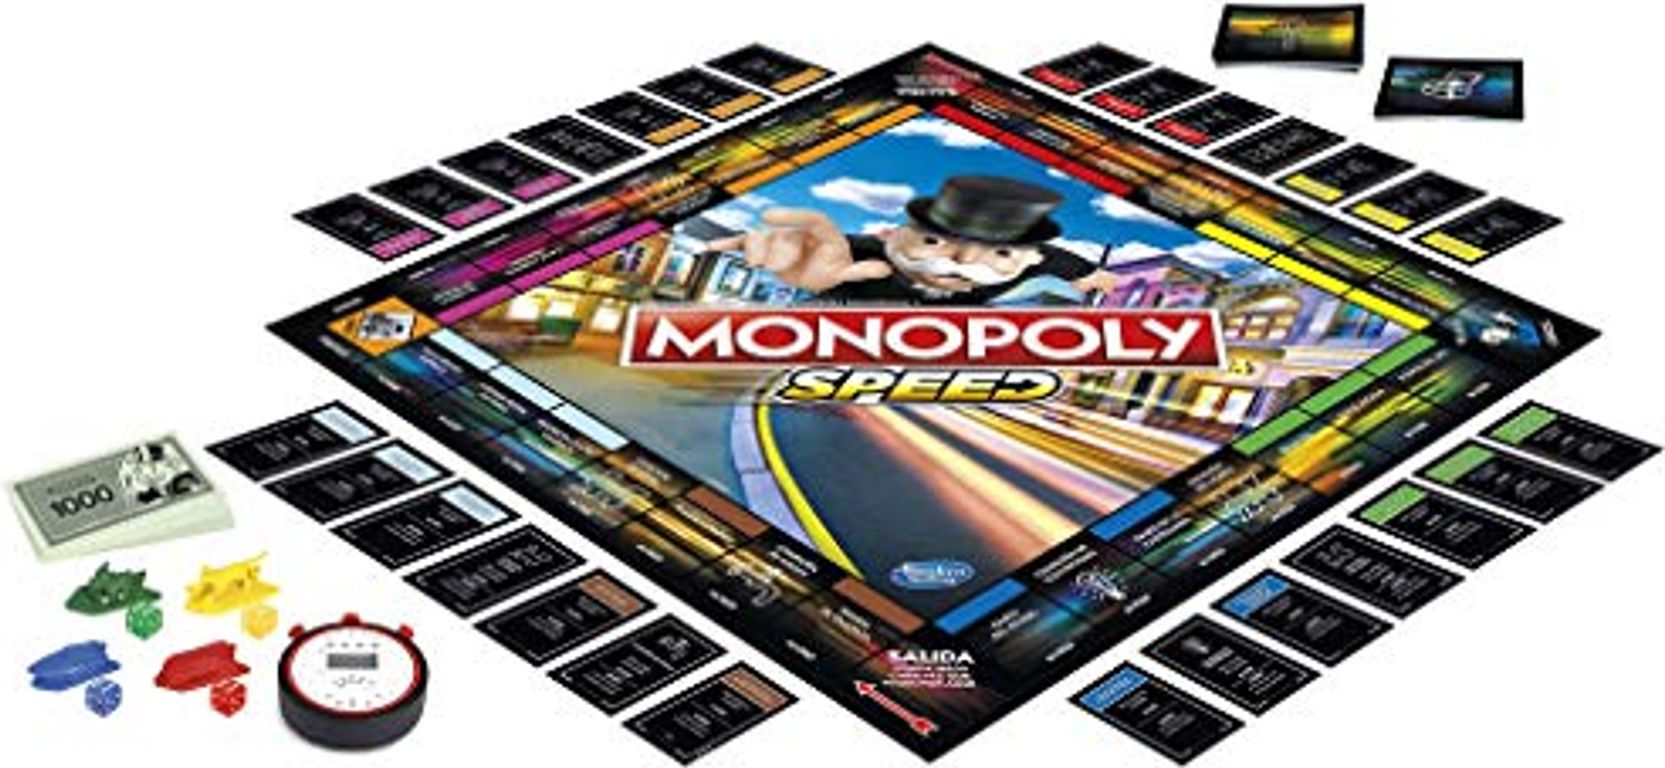 Monopoly Speed partes